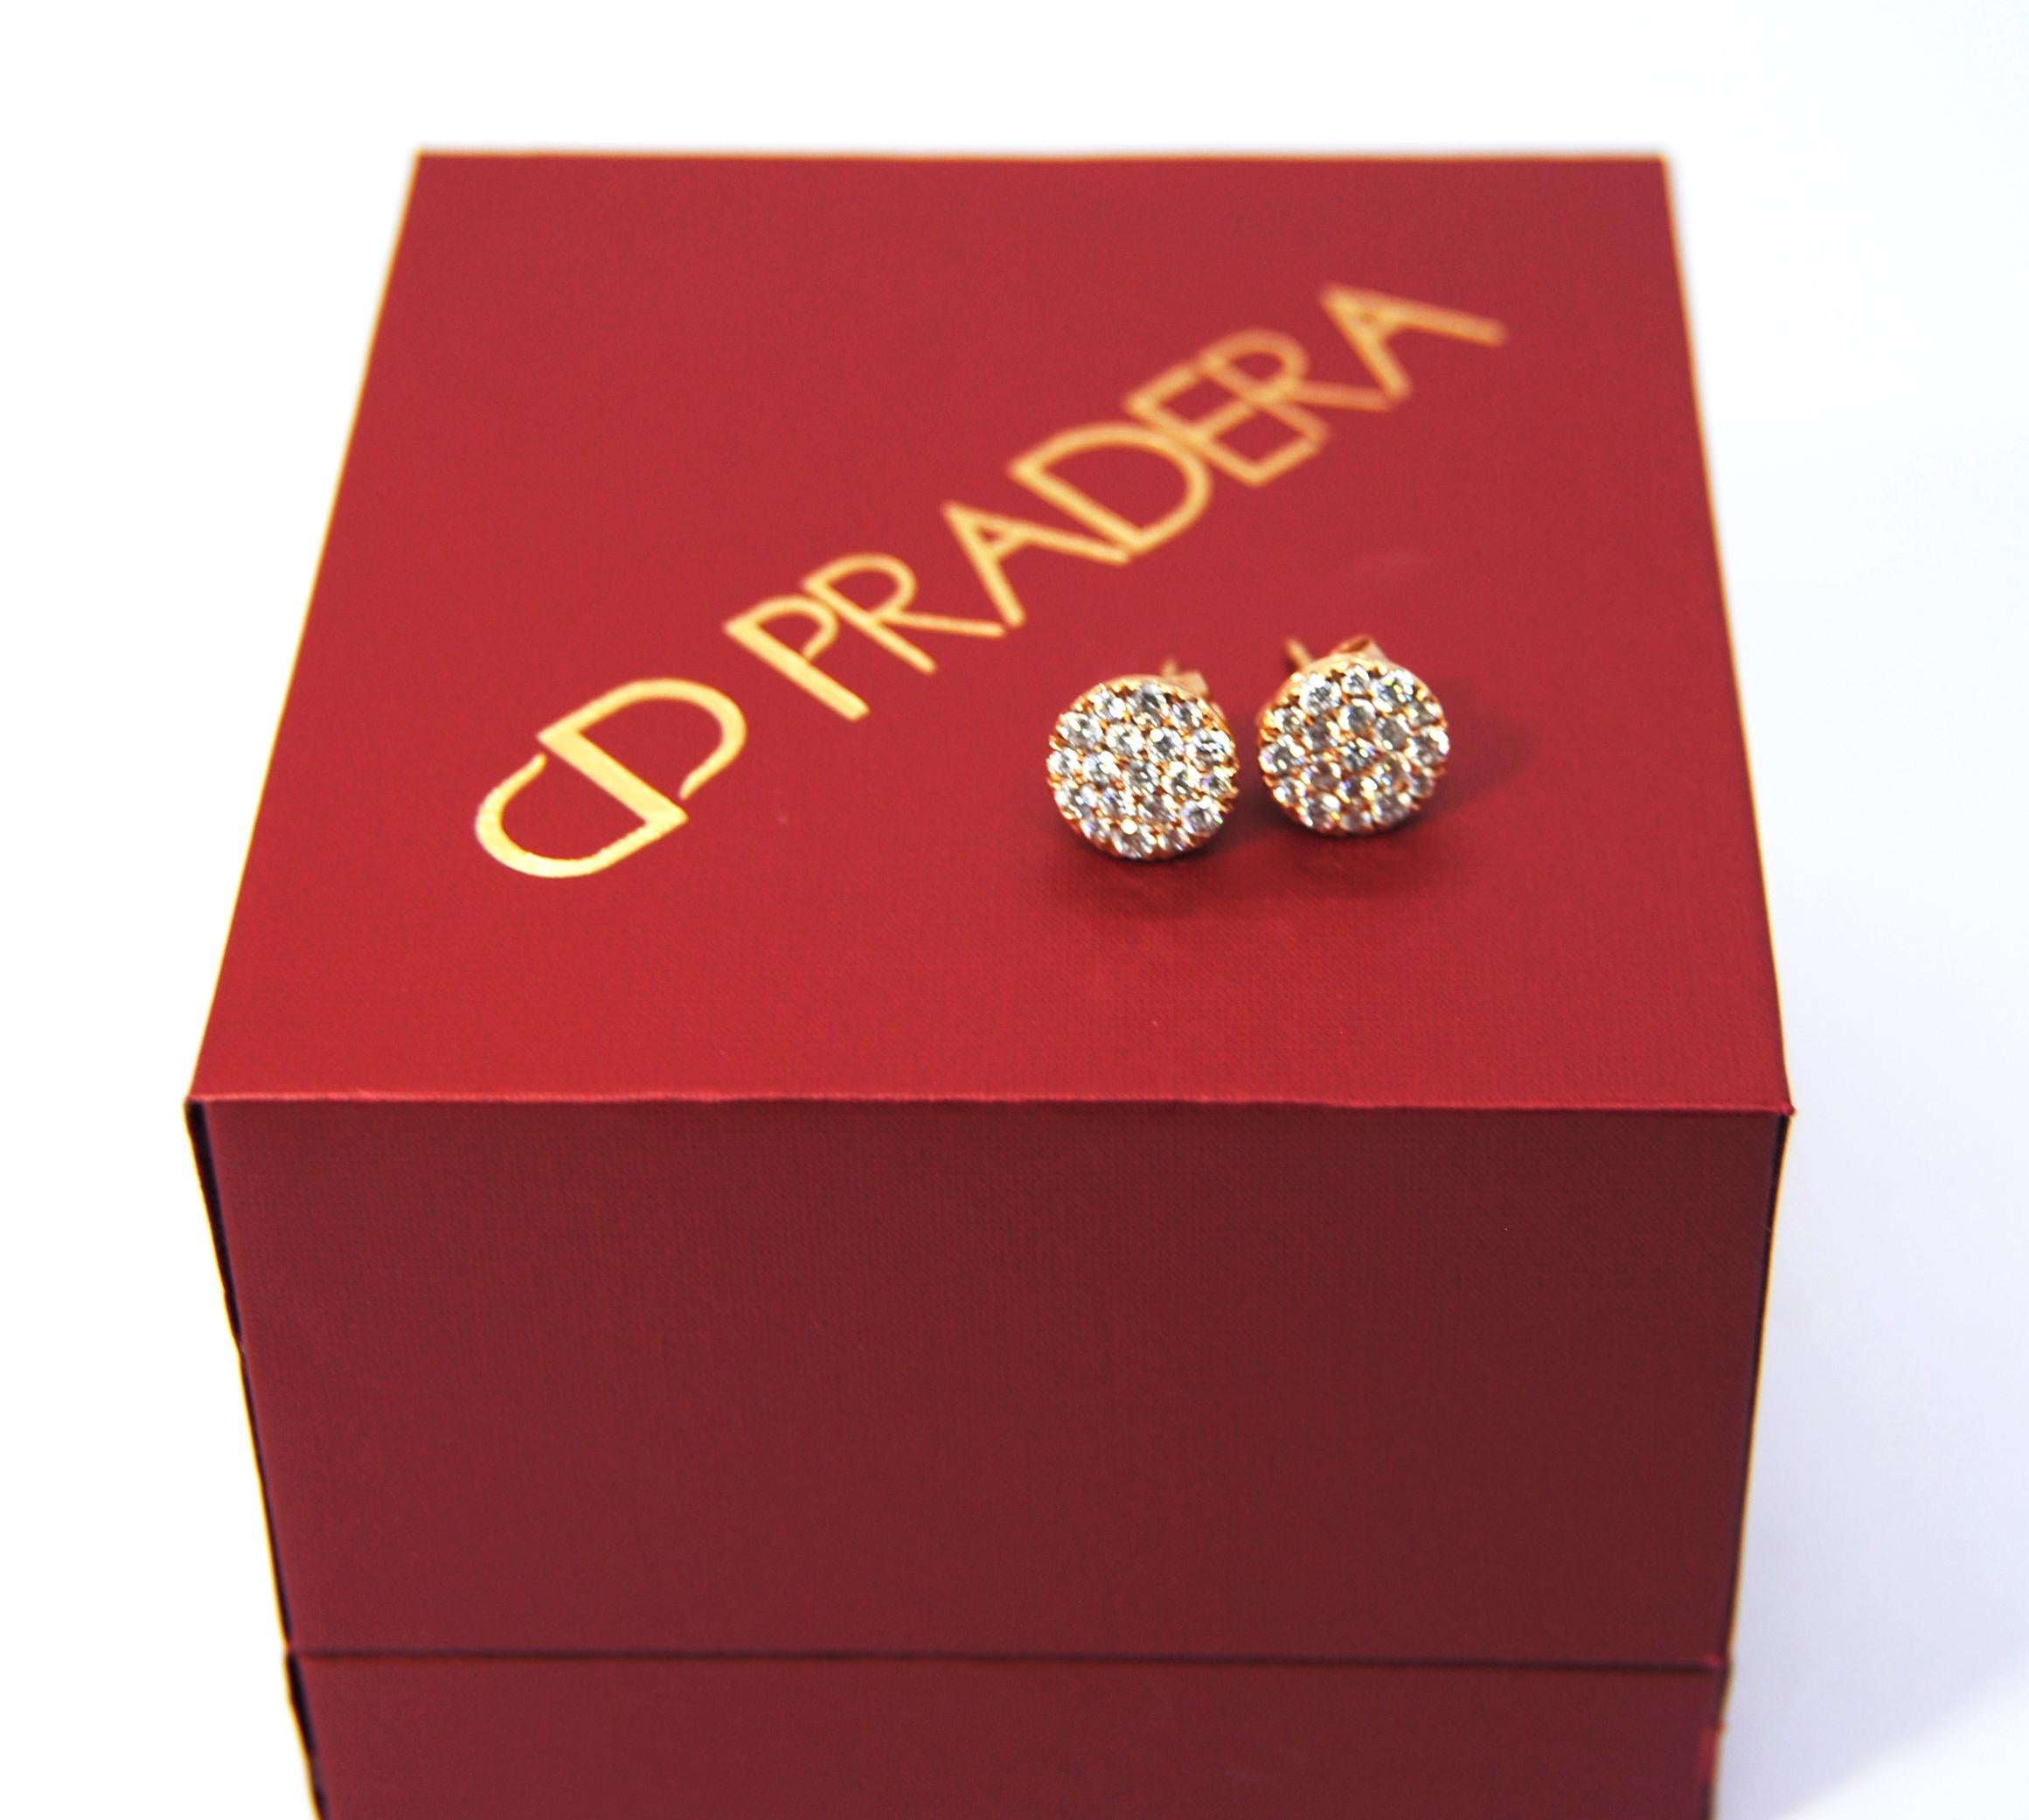 Sleekly crafted in 18K yellow gold these diamond and yellow gold studs are the ideal complement for every day classy look. Can come in white and rose gold. 
Please note that carat and weights may vary slightly since each Irama Pradera Jewels